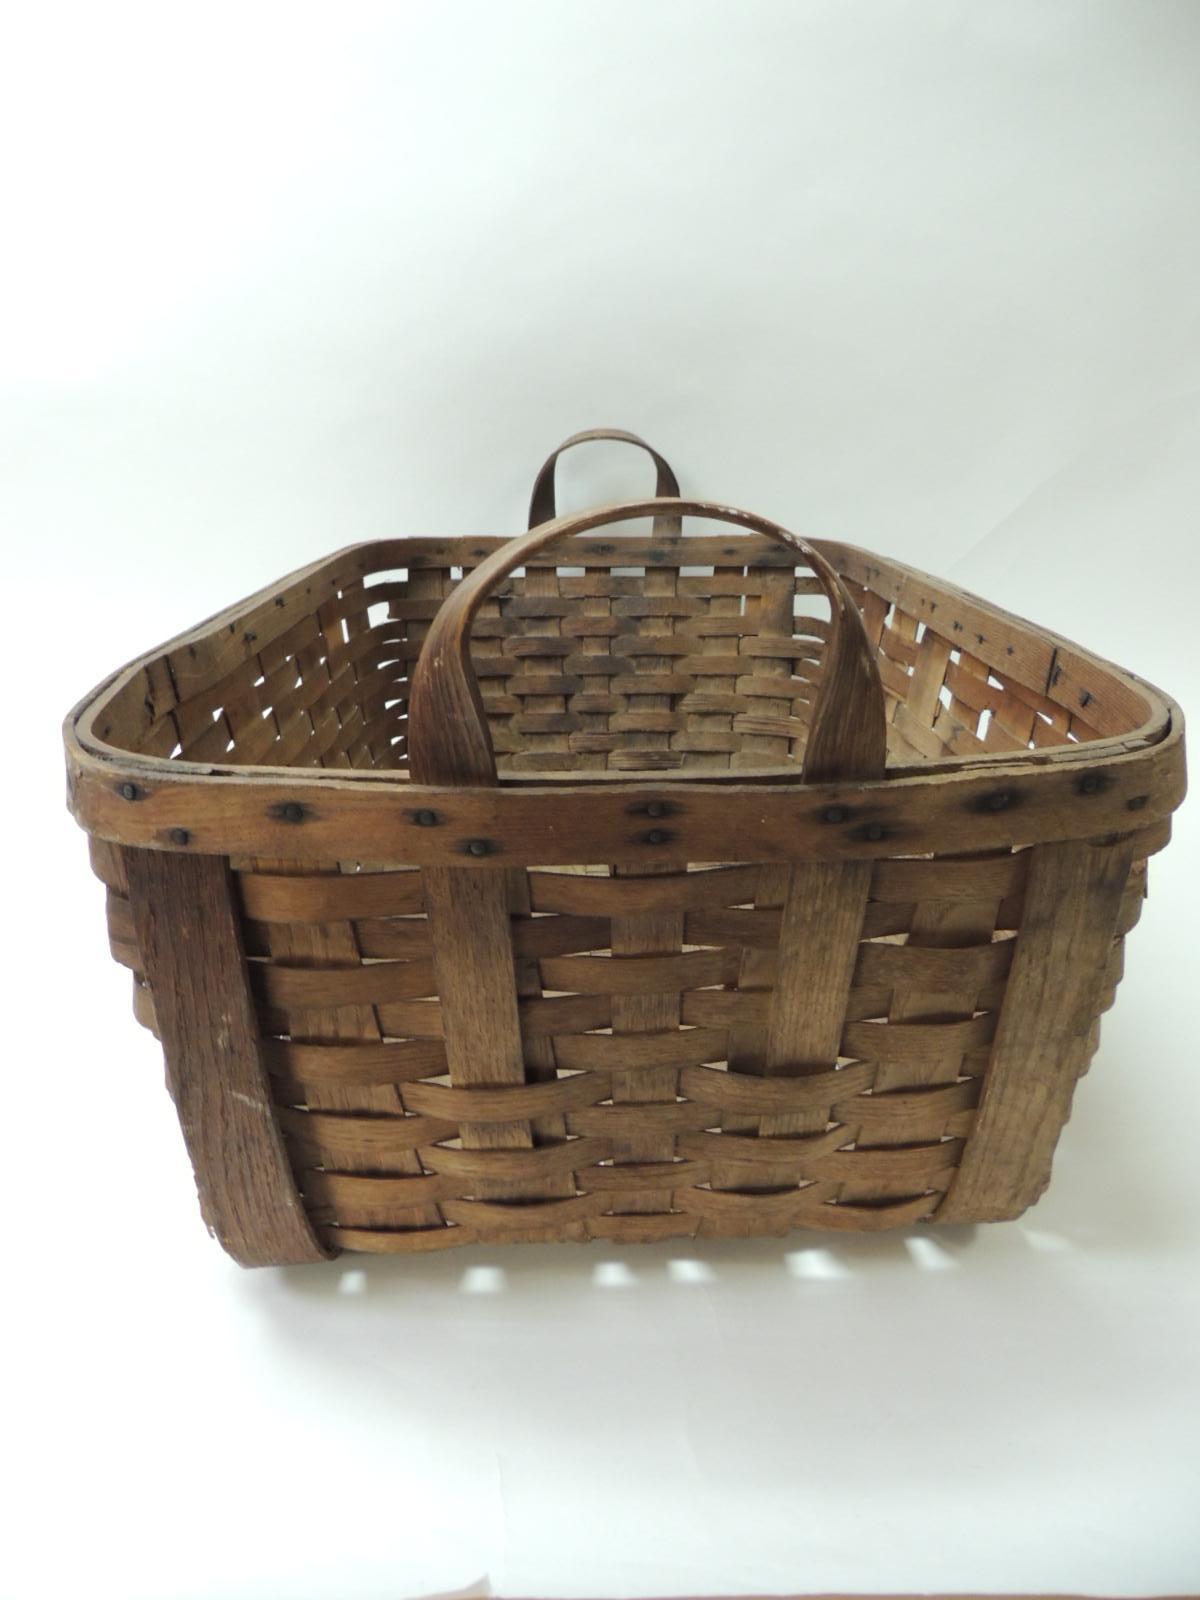 American Antique Large Over-Size Wooden Flat-Woven Harvest Basket with Handles